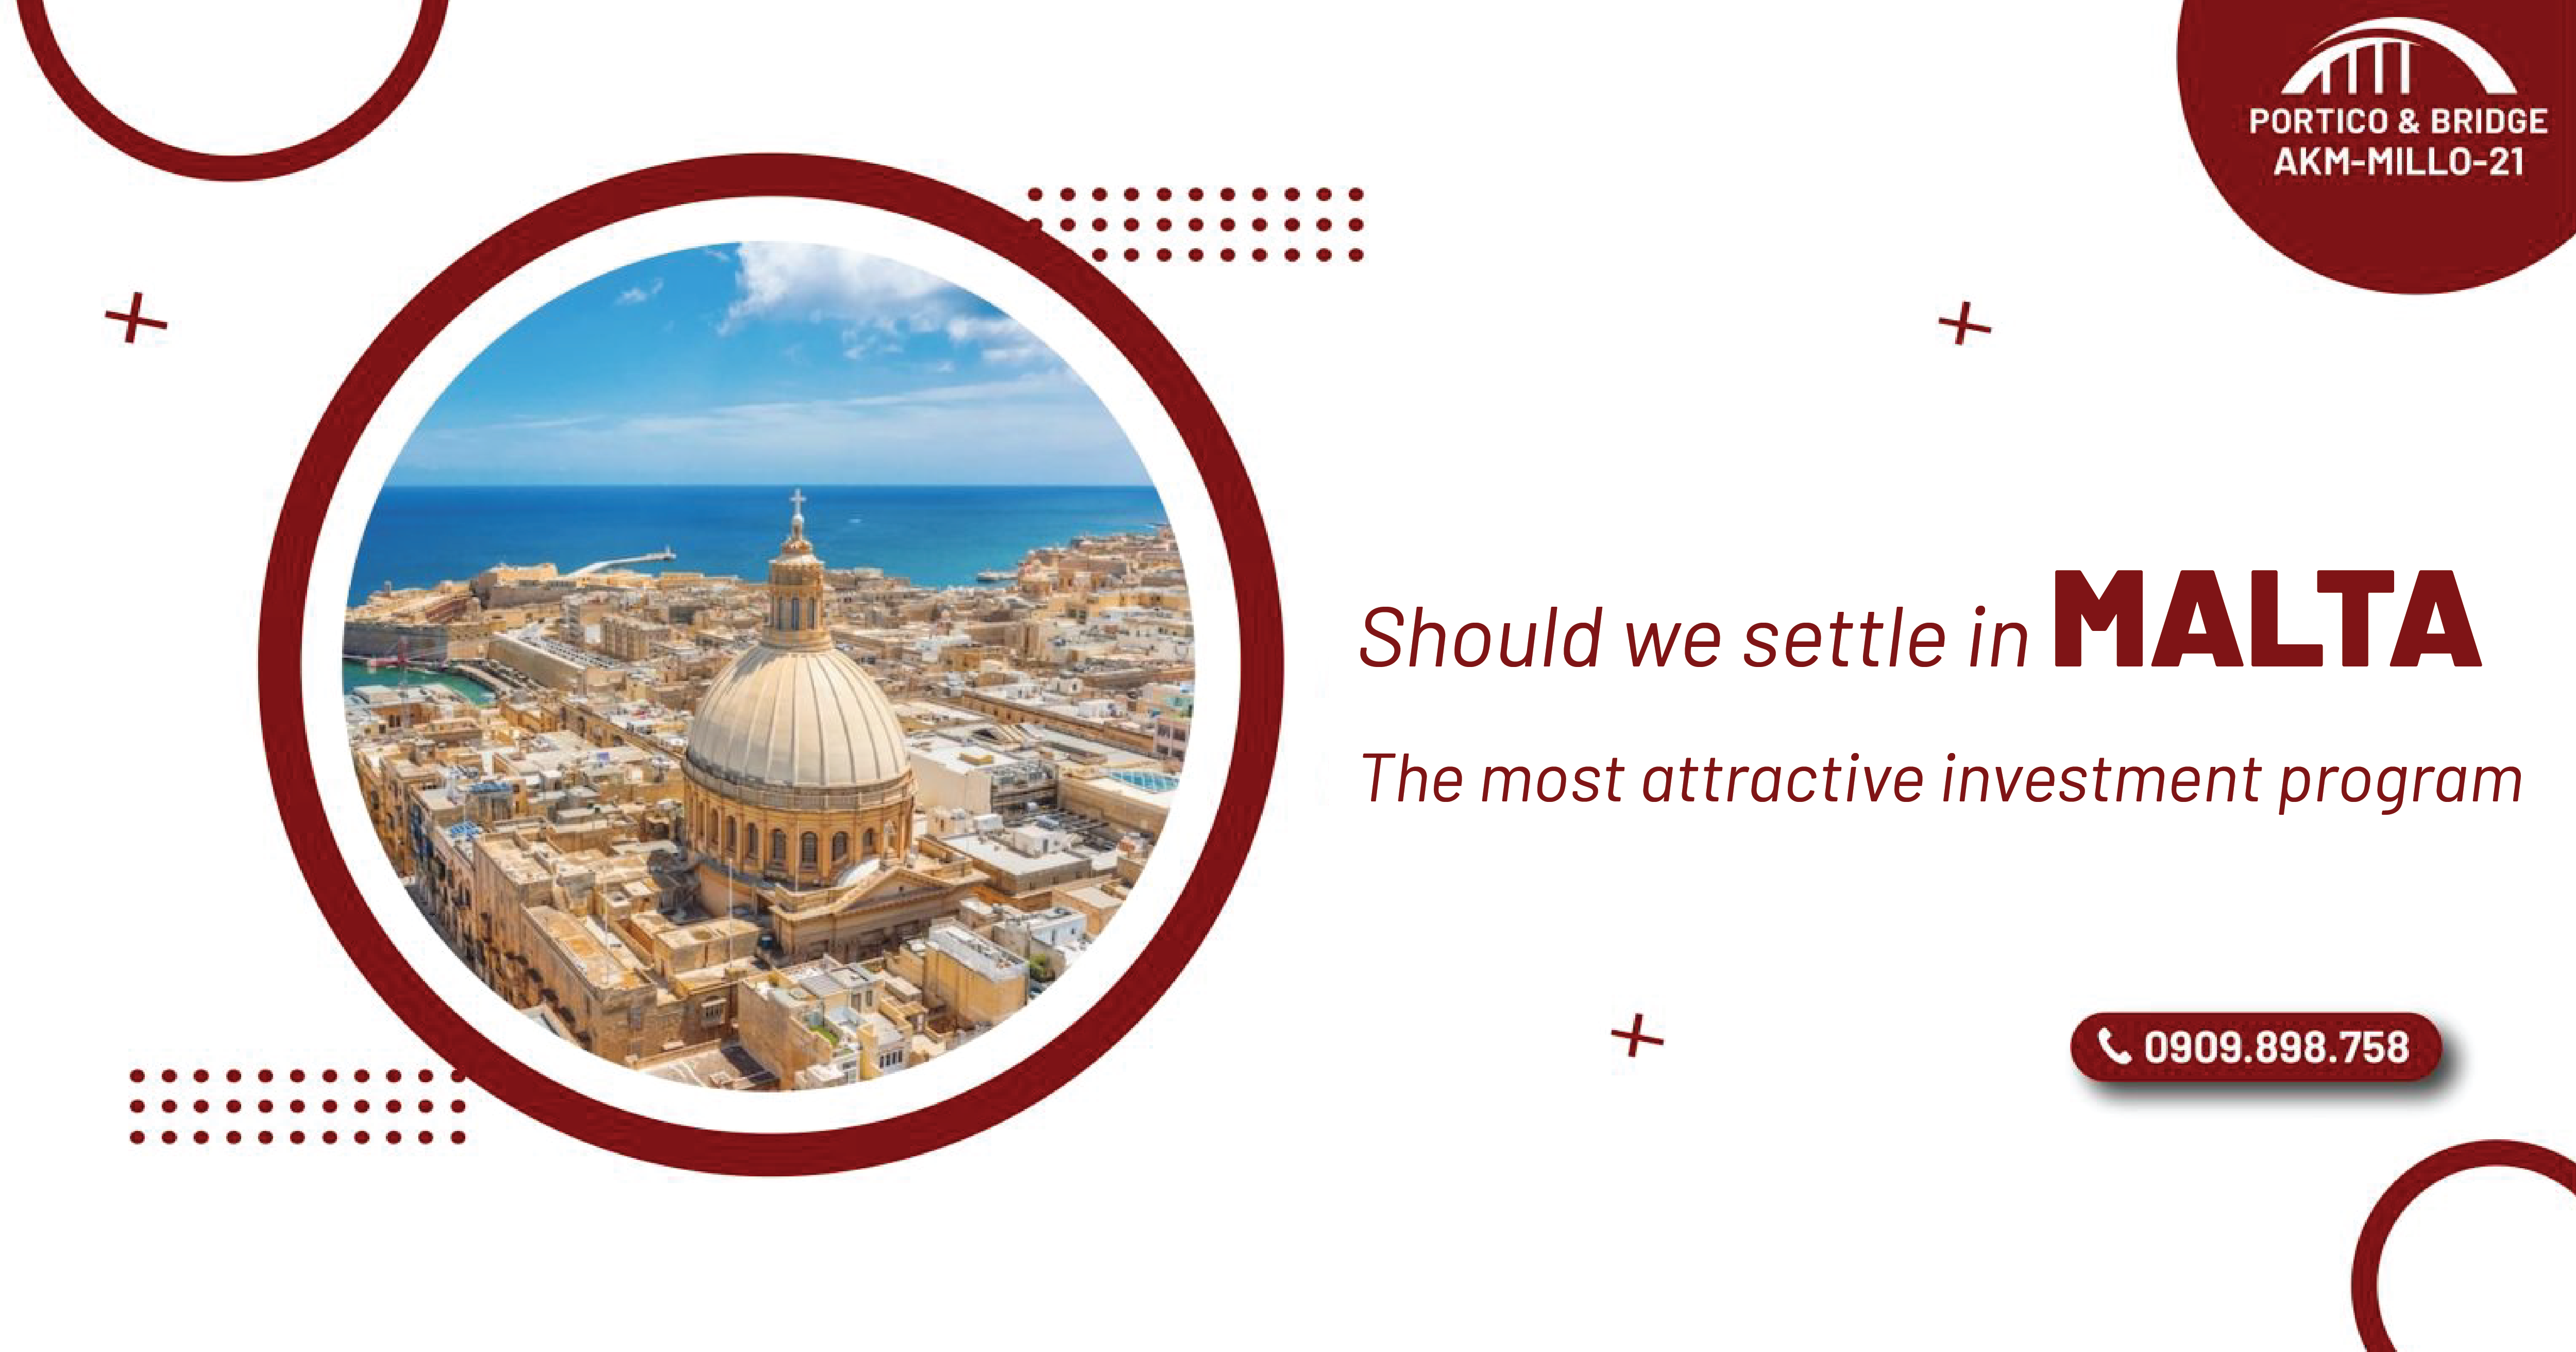 Should we settle in Malta - the most attractive investment program